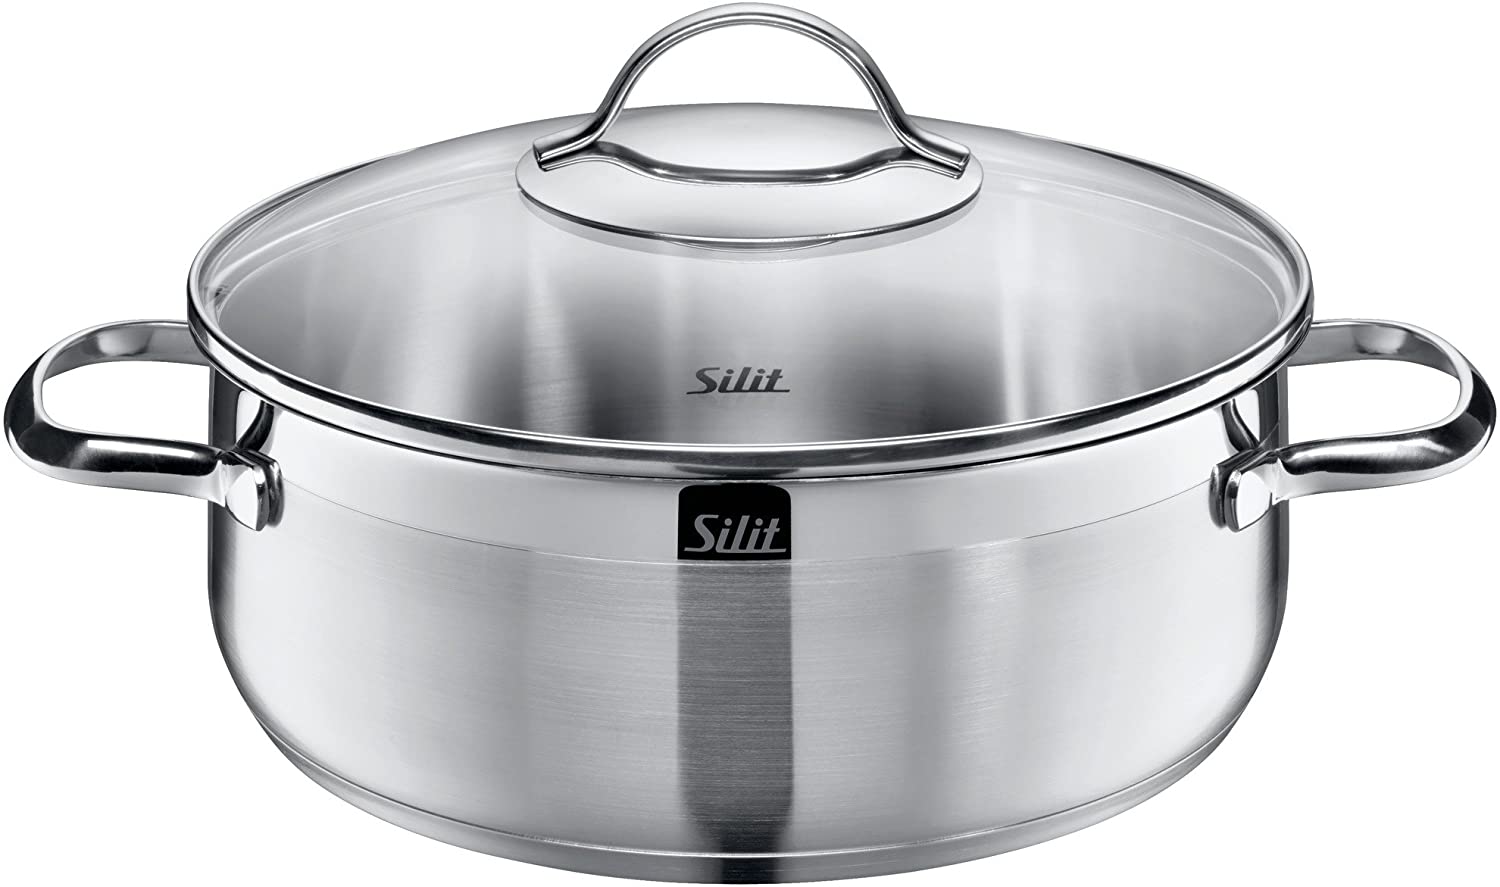 Silit Cooking Pot Diameter 16 cm Approx. Silit Pisa Cooking Pot, 1.4L, Pouring Rim, Glass Lid, Polished Stainless Steel, Suitable for Induction Cookers, Dishwasher Safe, Ø 24 cm